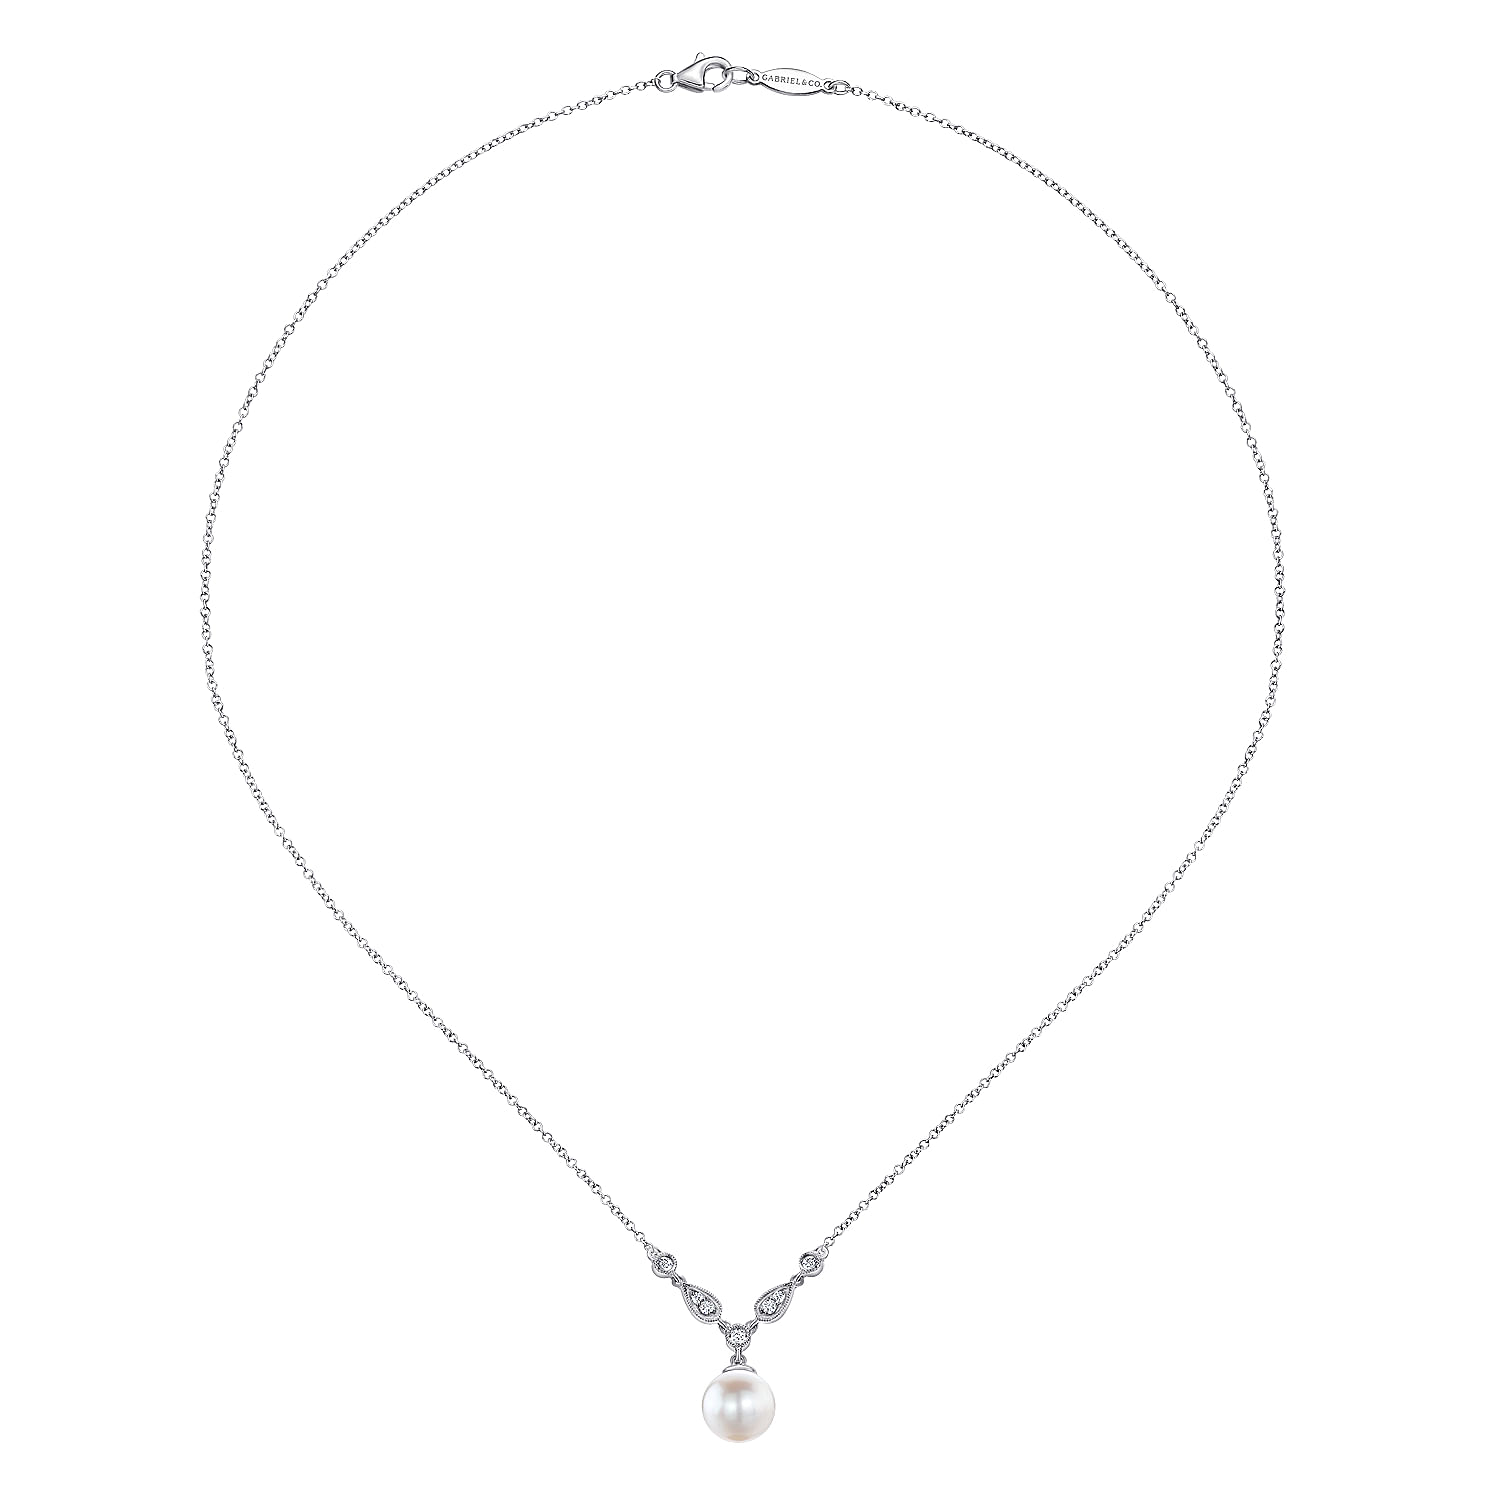 14K White Gold Cultured Pearl and Diamond Accent Necklace | NK1420W45PL